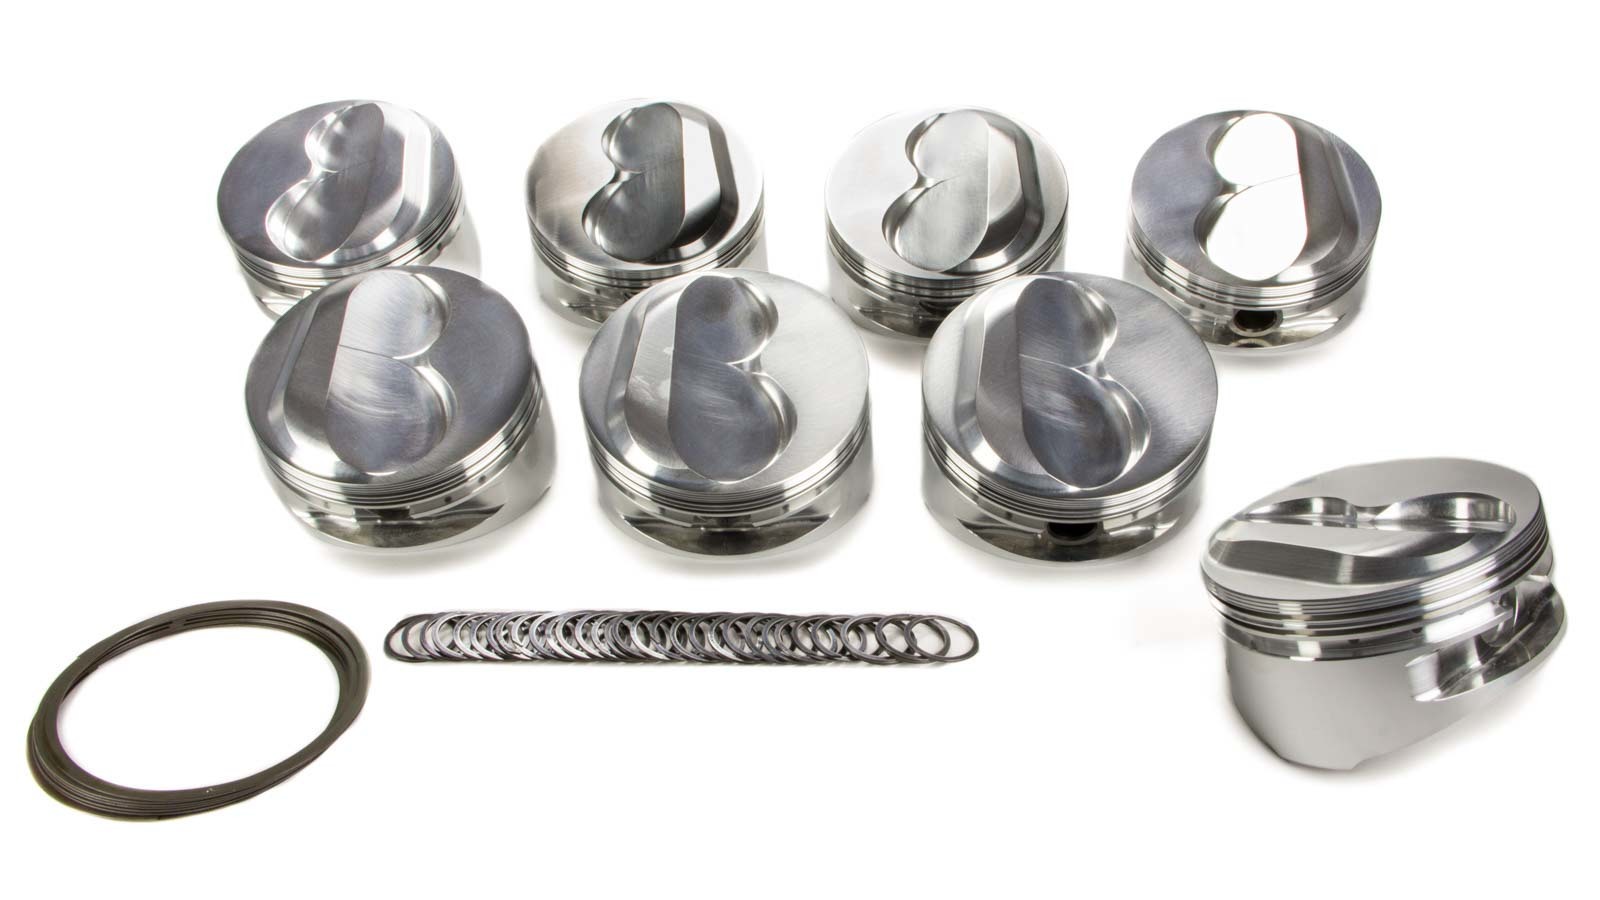 JE Pistons 207513 Piston, Small Block Dome, Forged, 4.185 in Bore, 1/16 x 1/16 x 3/16 in Ring Grooves, Plus 10.90 cc, Small Block Chevy, Set of 8